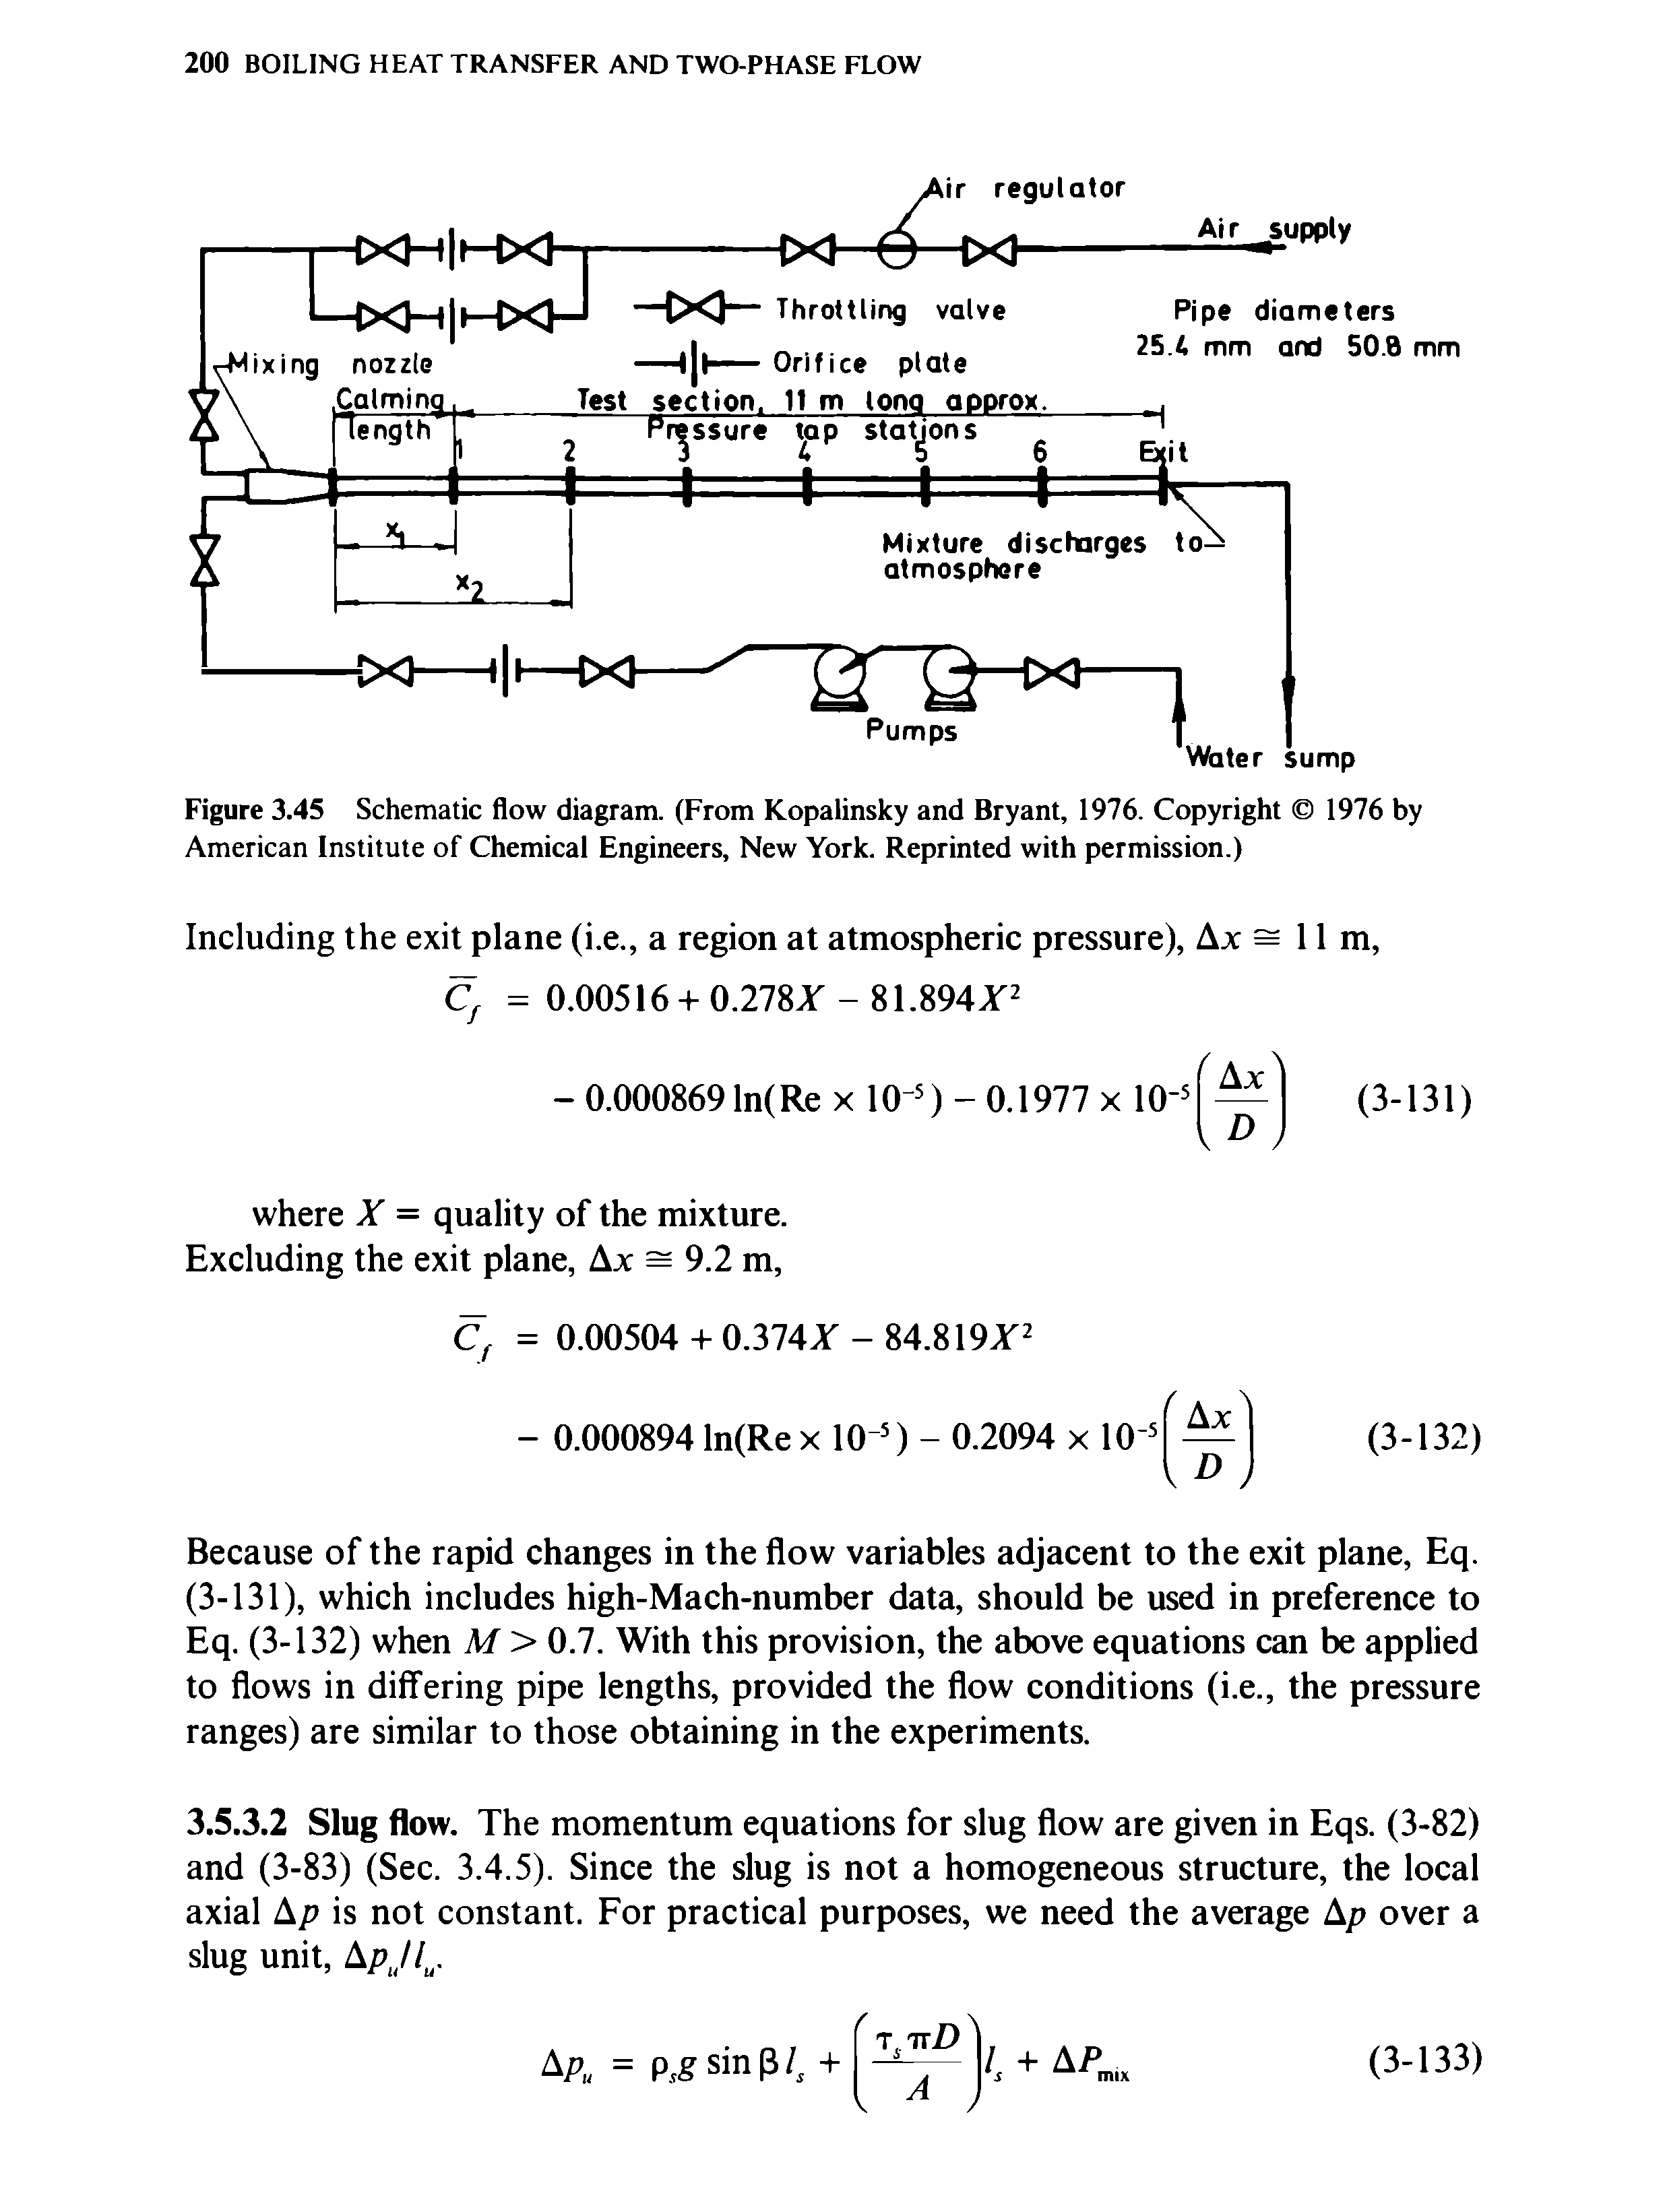 Figure 3.45 Schematic flow diagram. (From Kopalinsky and Bryant, 1976. Copyright 1976 by American Institute of Chemical Engineers, New York. Reprinted with permission.)...